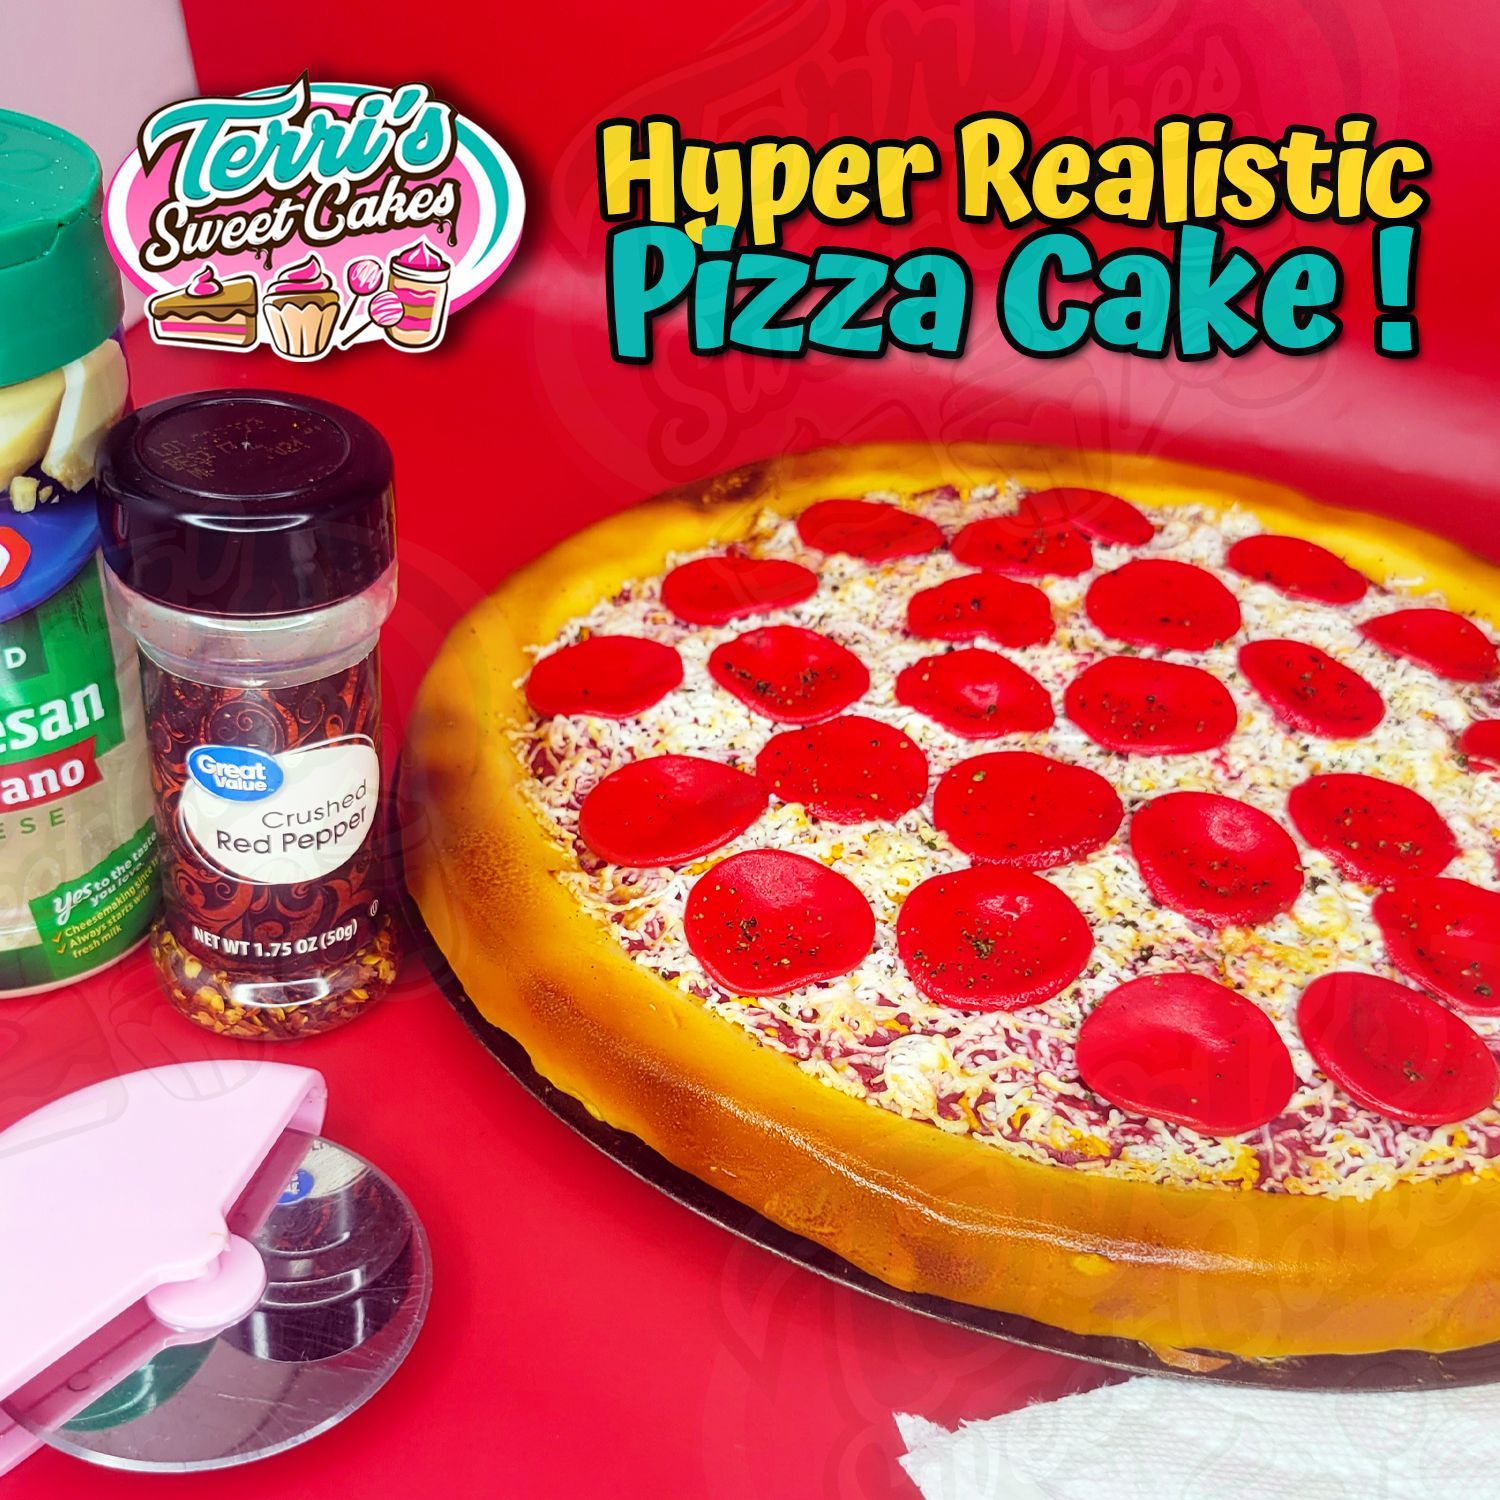 Hyper Realistic Pizza Cake by Terri's Sweet Cakes!